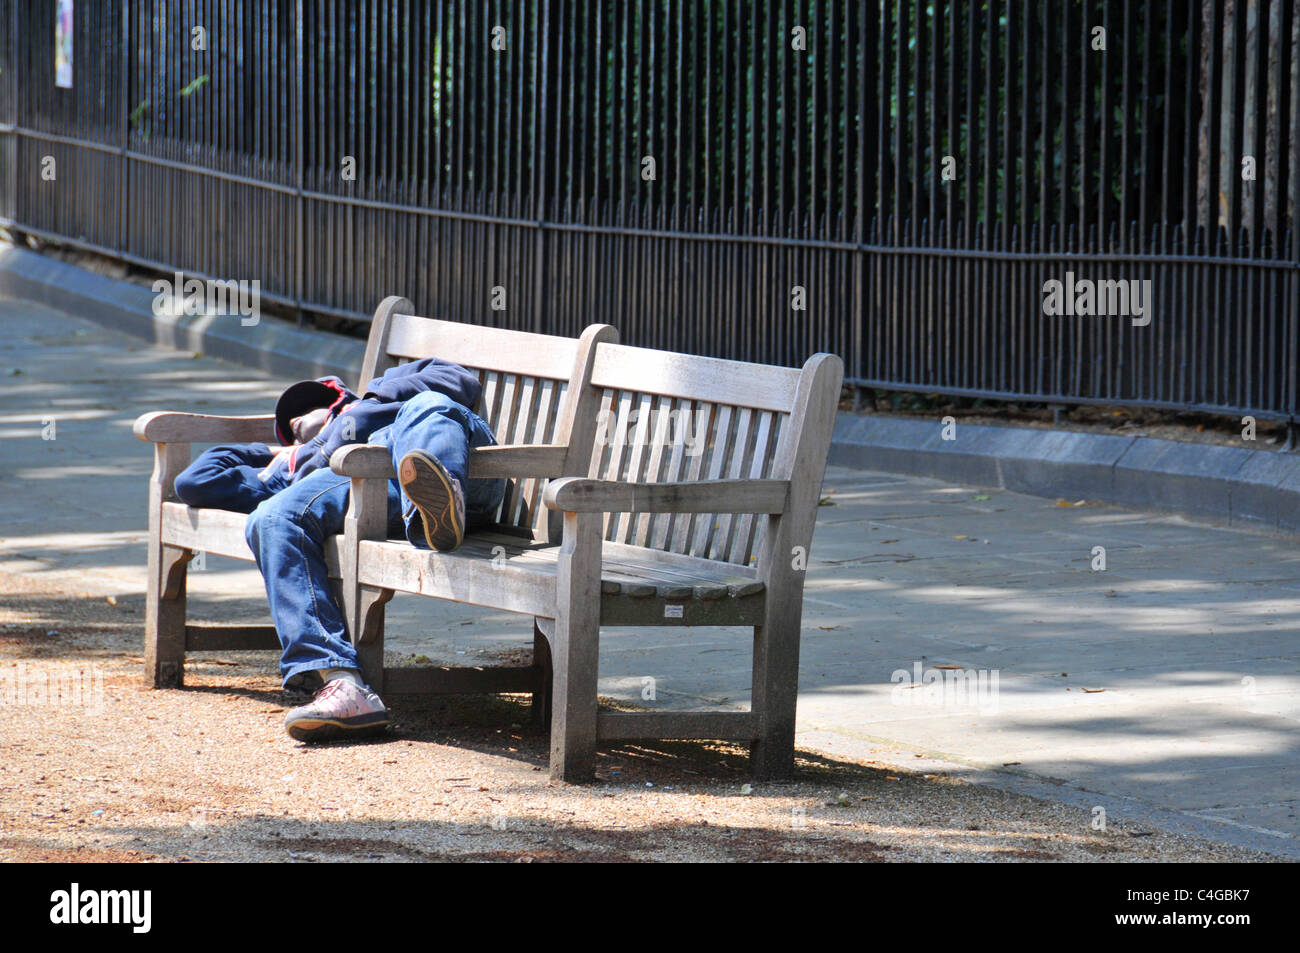 Homeless Sleeping Bench High Resolution Stock Photography and Images ...